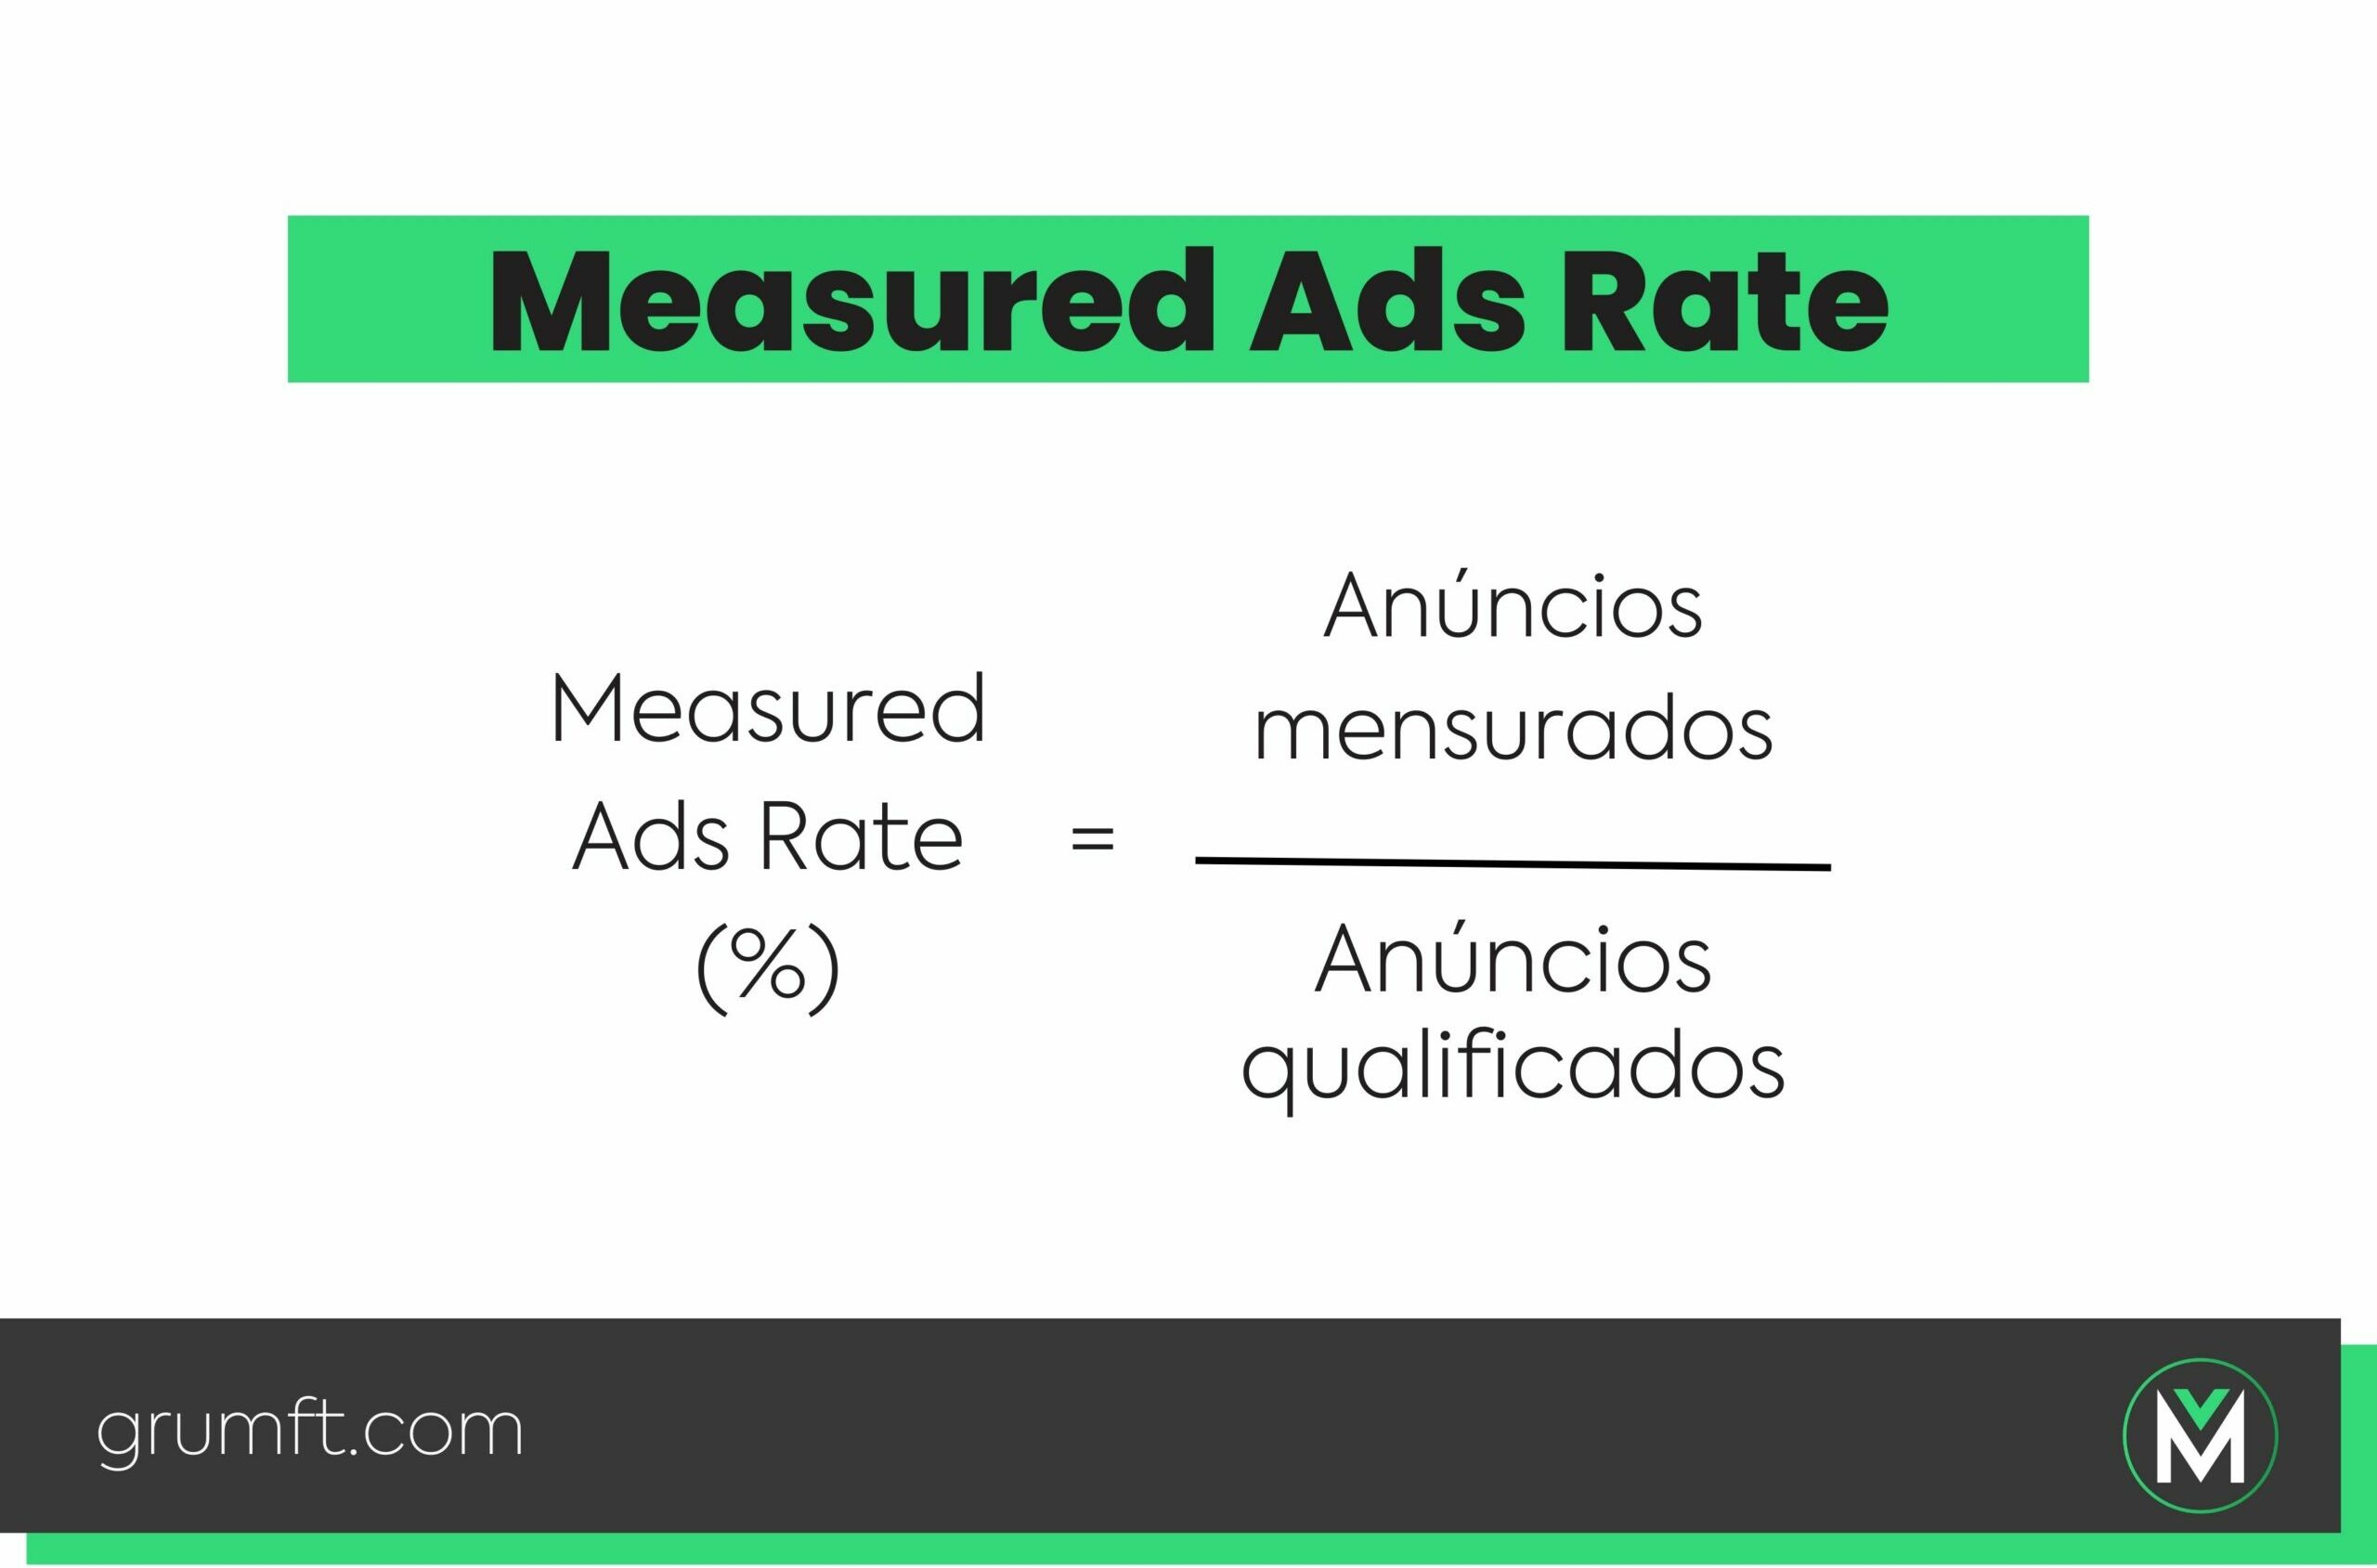 Measured ads rate